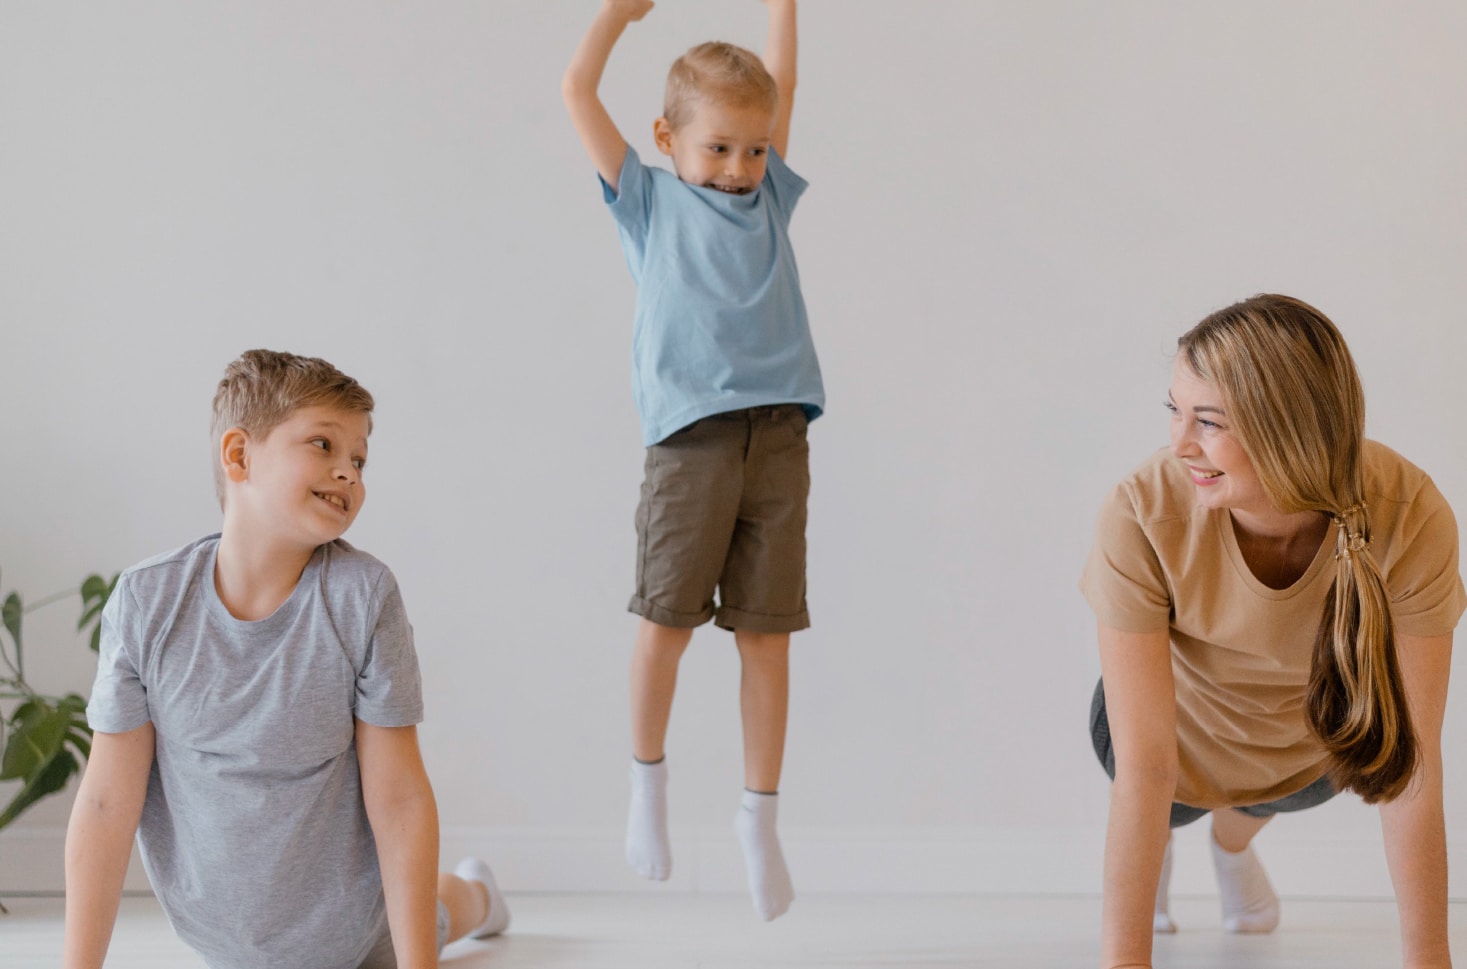 Two male children doing exercises together with an adult woman